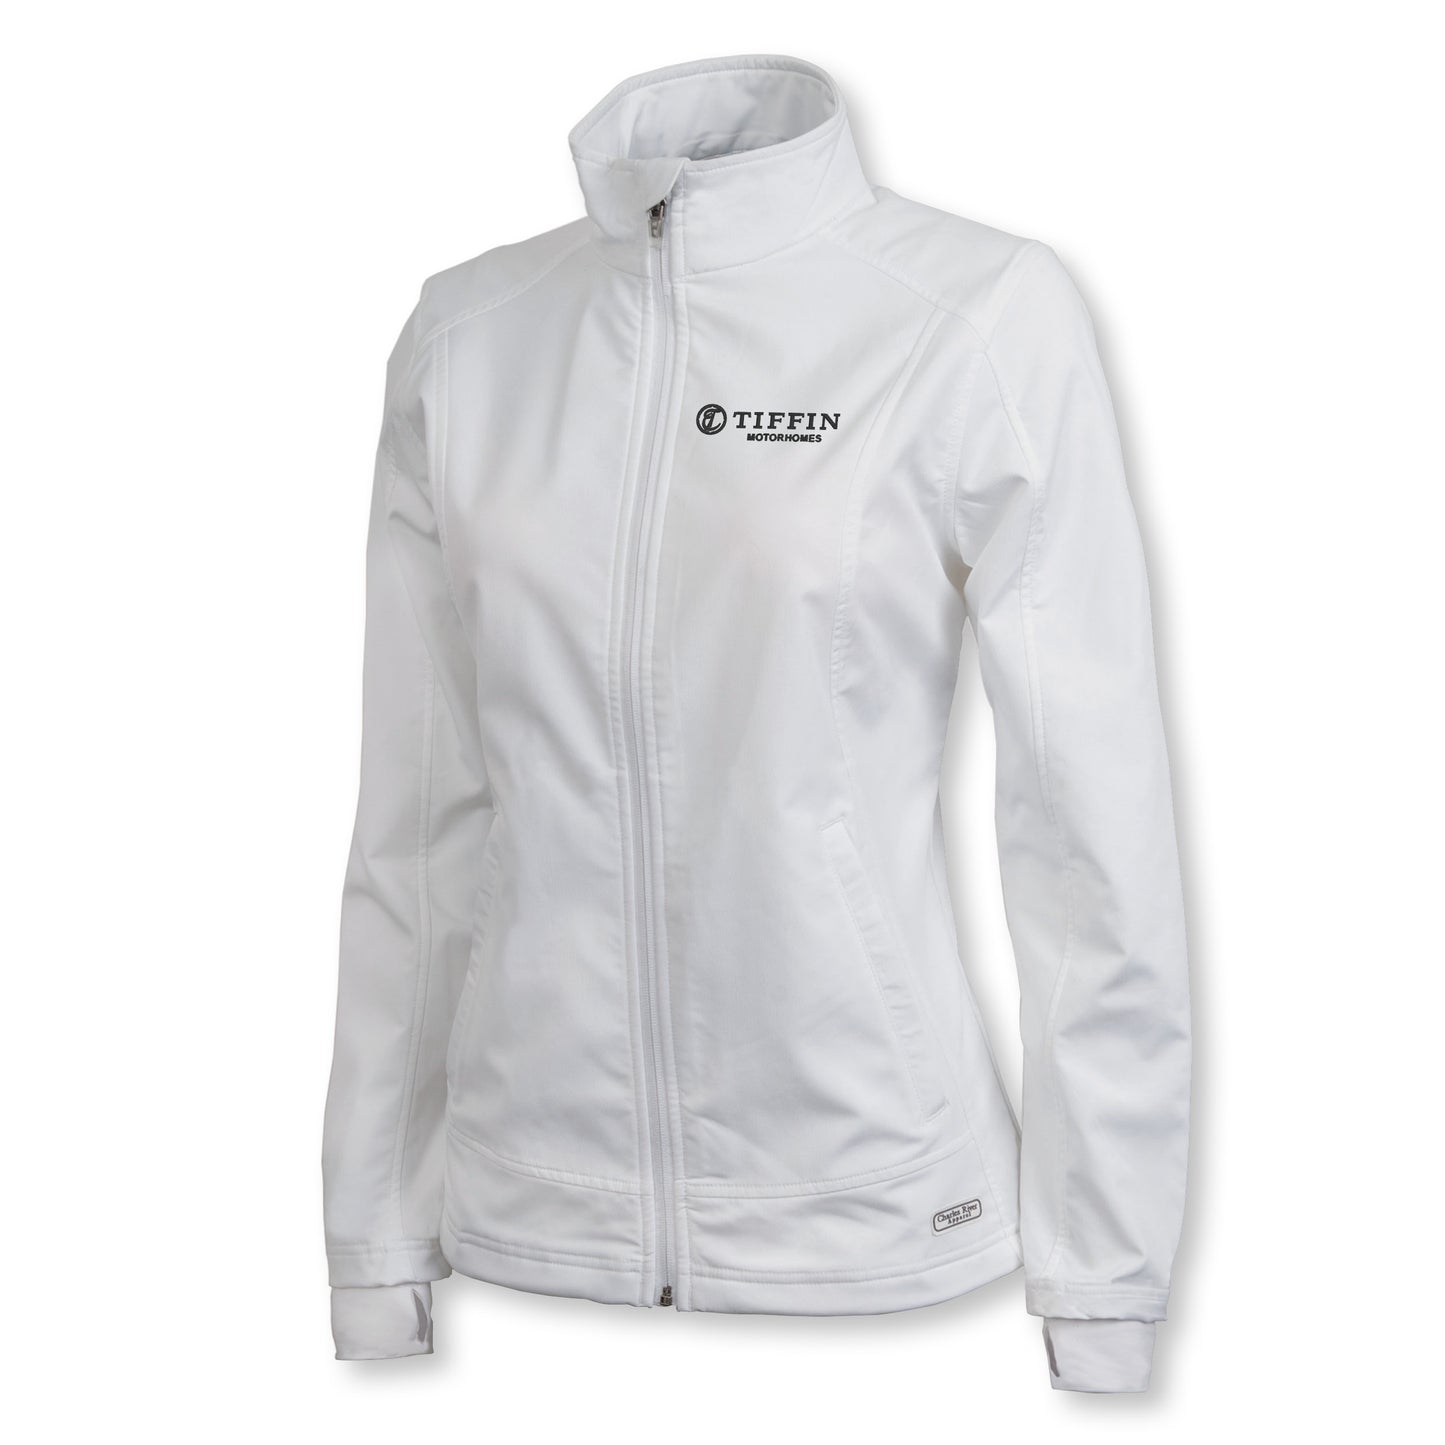 Jacket - Women's Axis Soft Shell